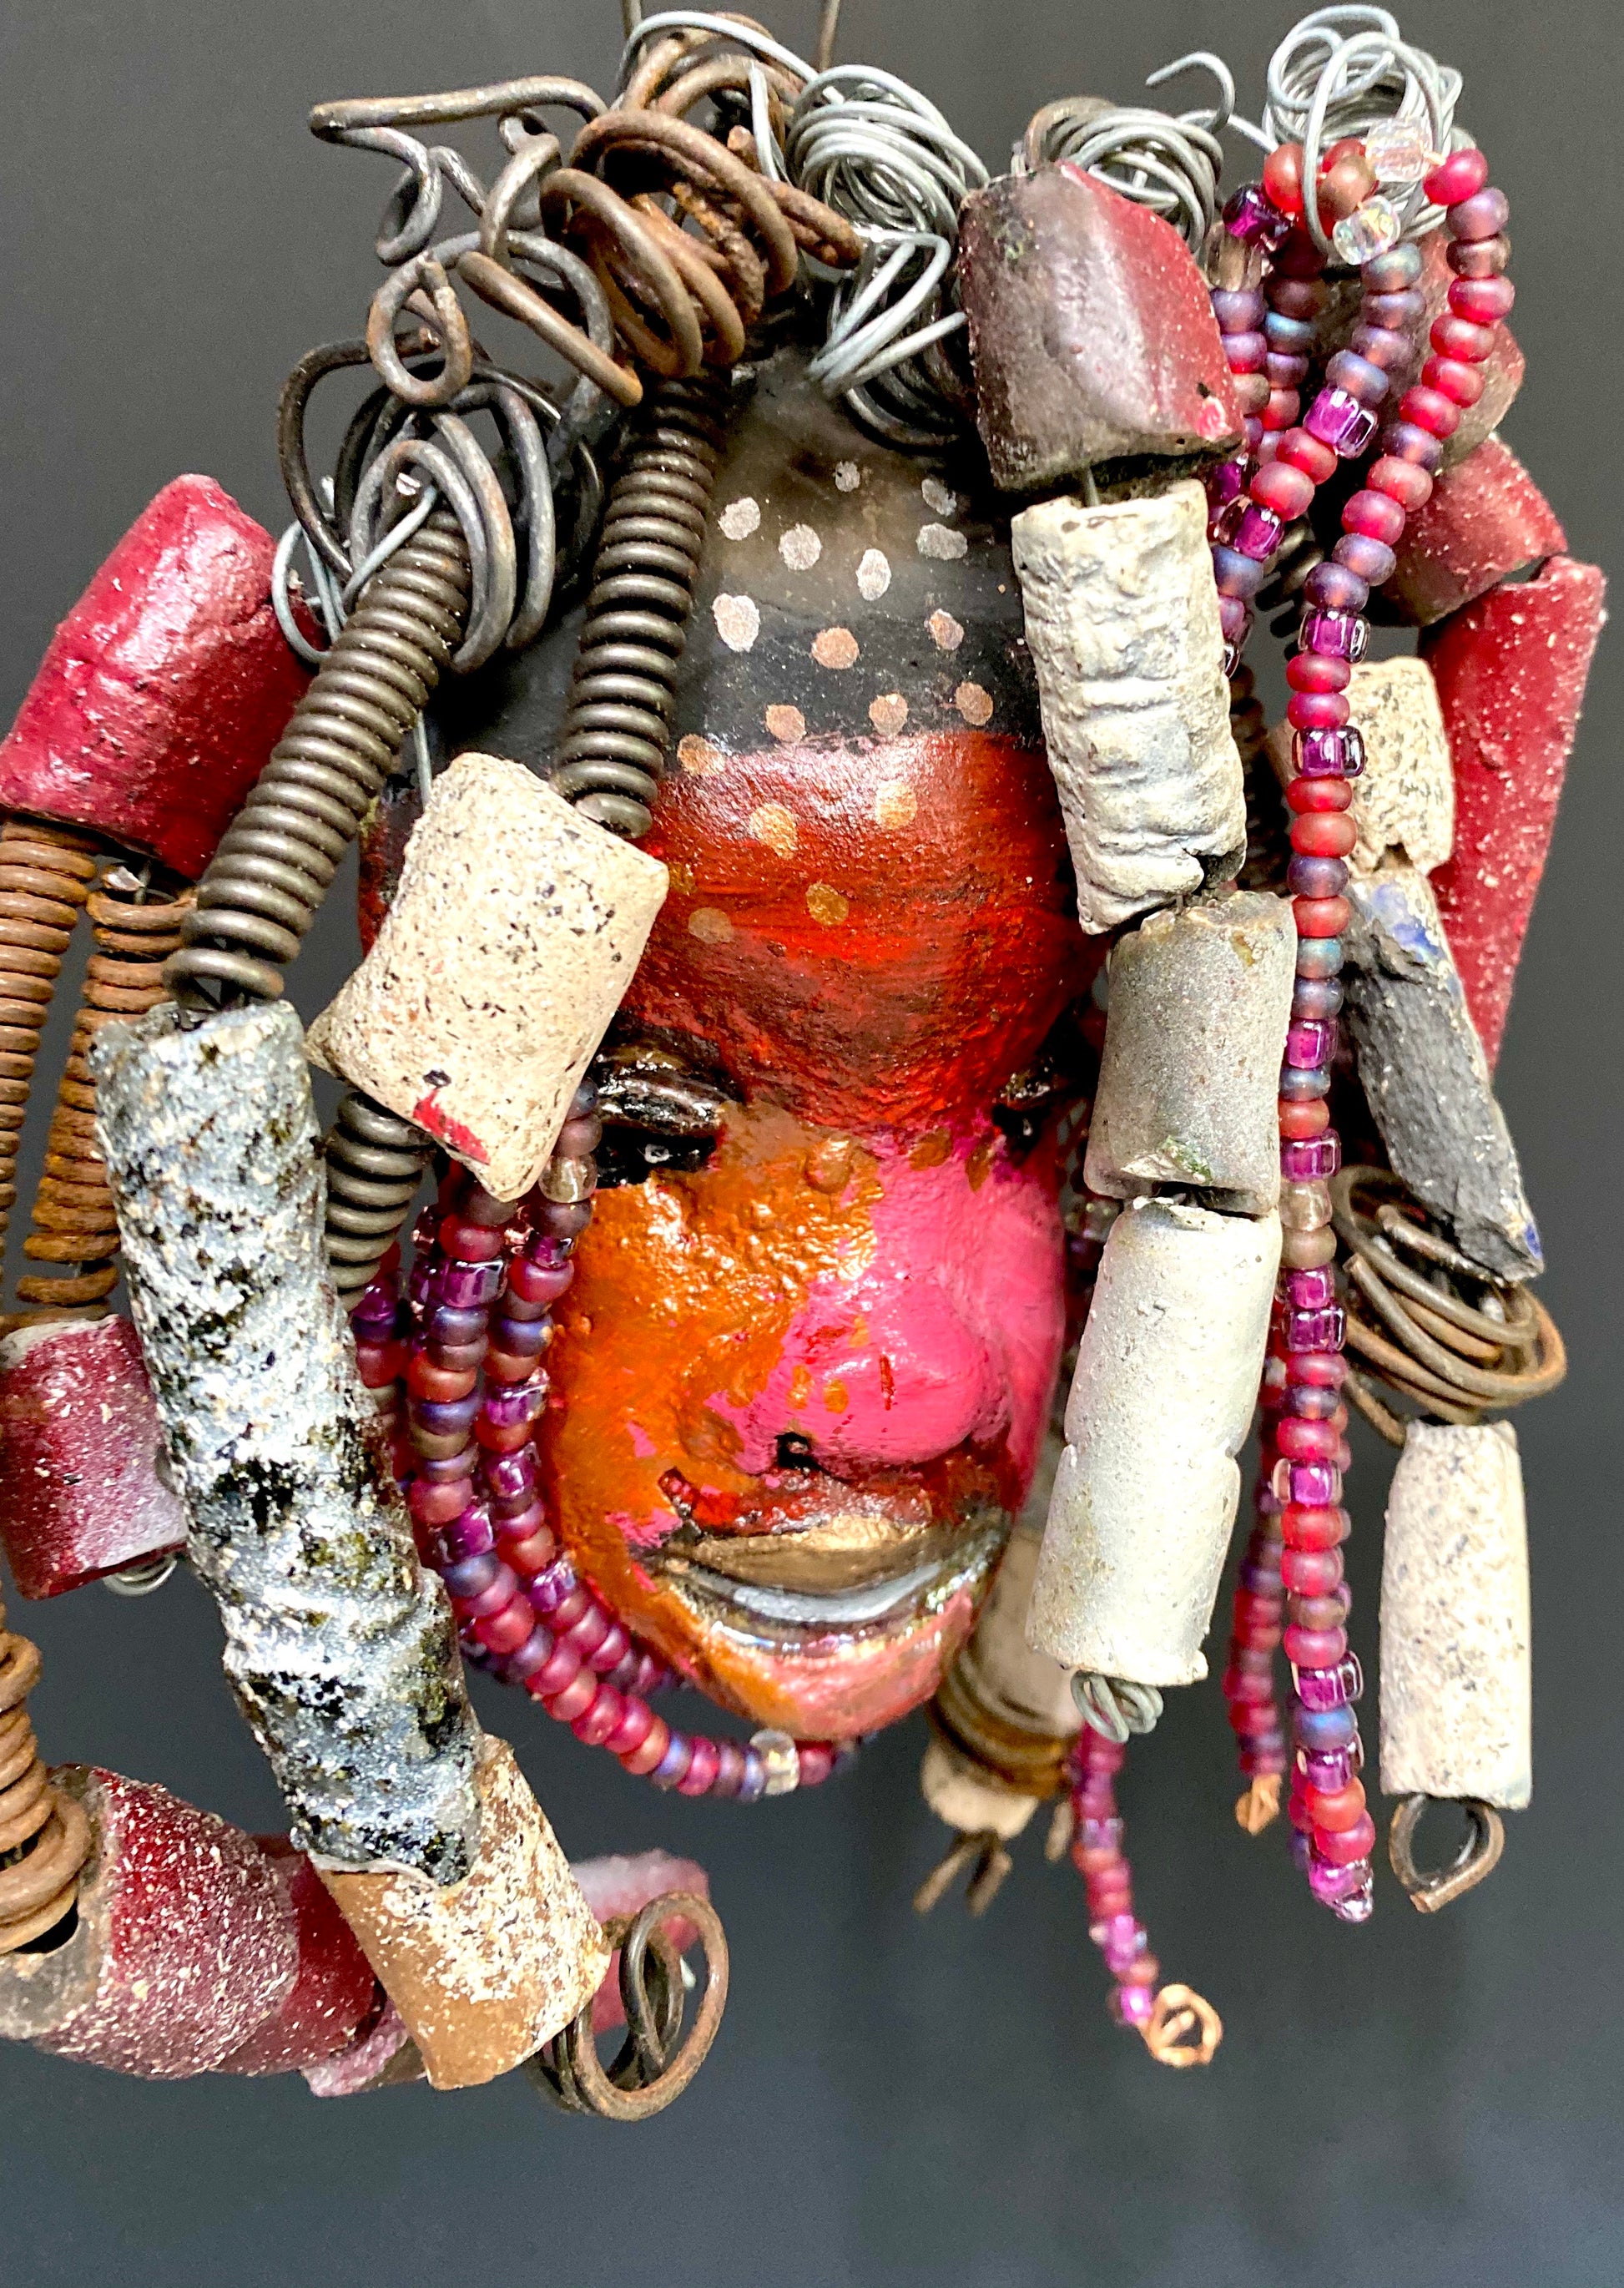 I started making mask soon after seeing authentic African artwork at the Smithsonian Museum of African Art. I was in total awe. I was inspired by my visit there..  Kylie has a multi colored red tone  metallic copper complexion. She is 7" x 5" and weighs 8 ozs. Kylie has  over 50 mini beads and handmade raku beads. Kylie has over 4 feet of 16 gauge wire hair.